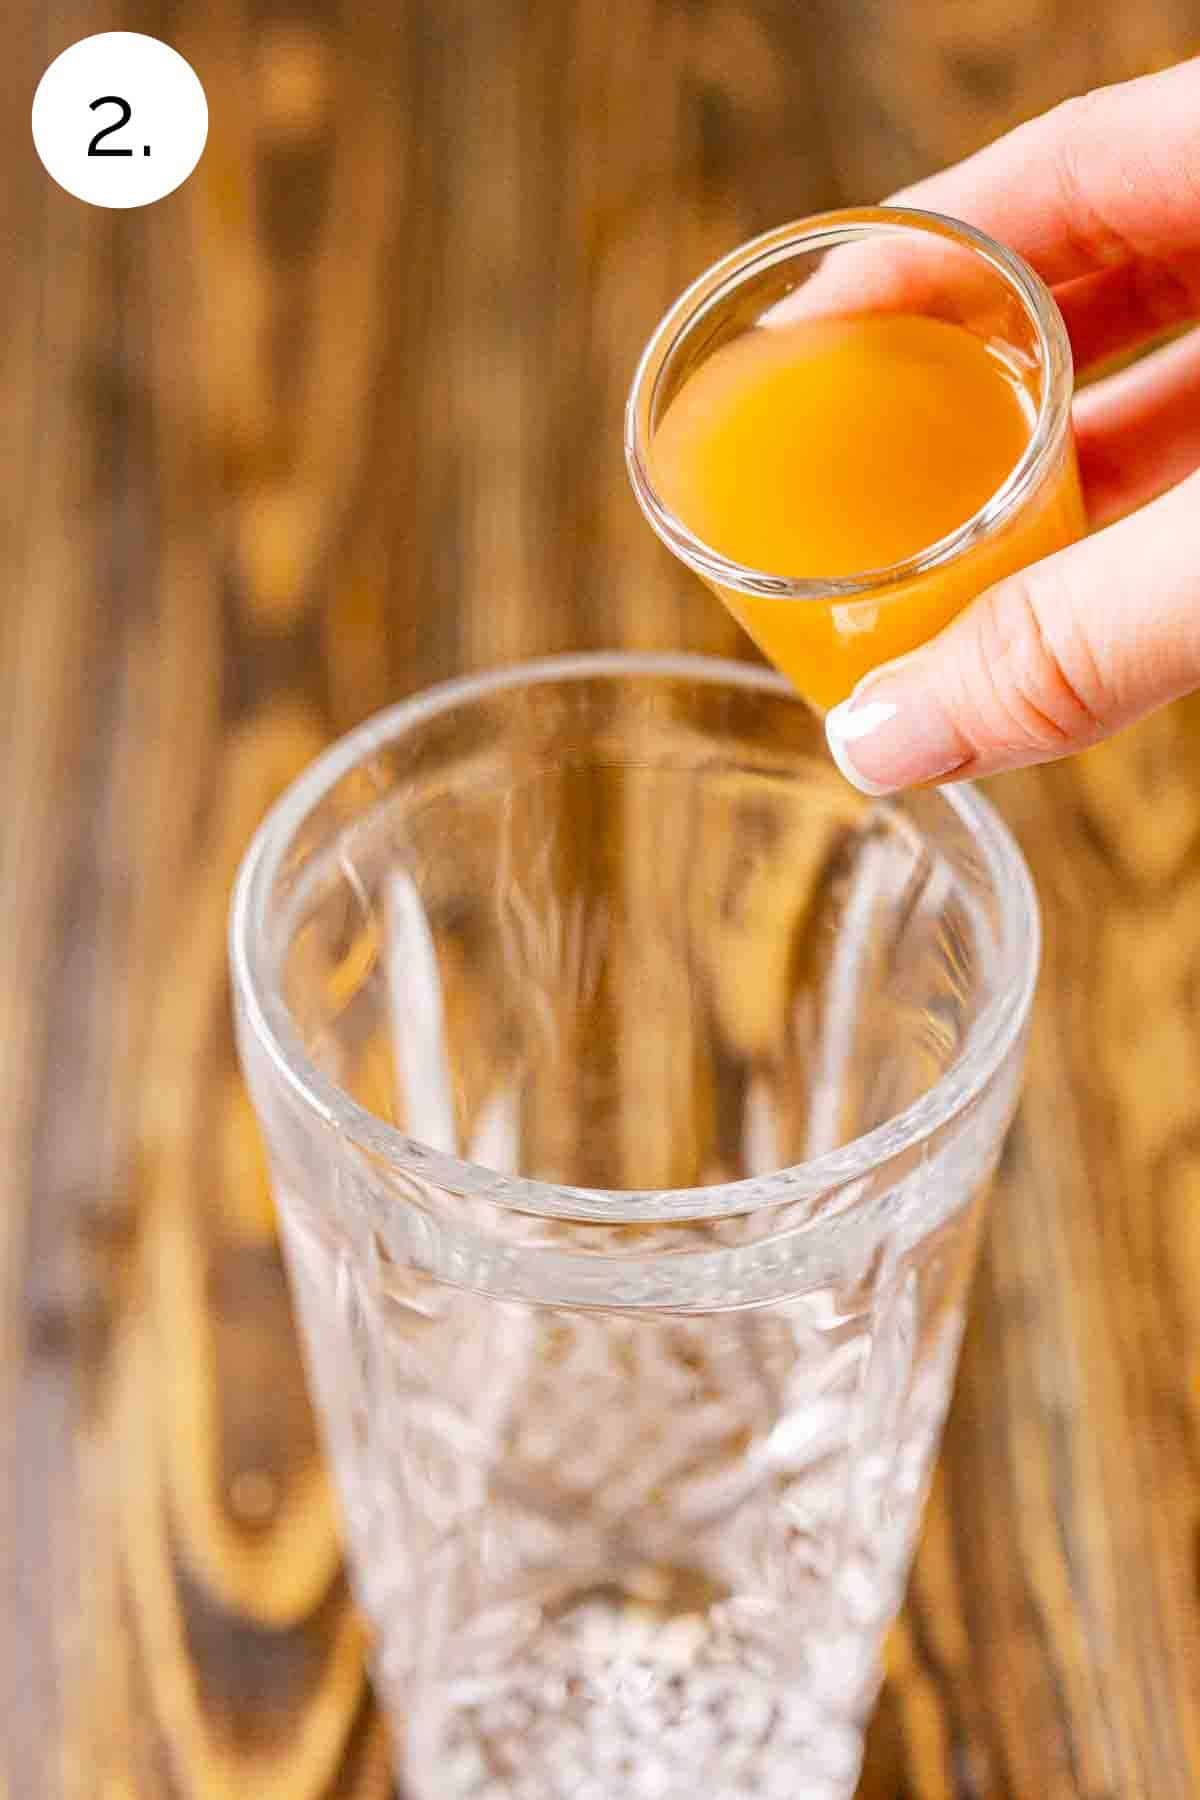 A hand pouring a shot glass filled with apple cider into a clear crystal cocktail shaker on a brown wooden surface.